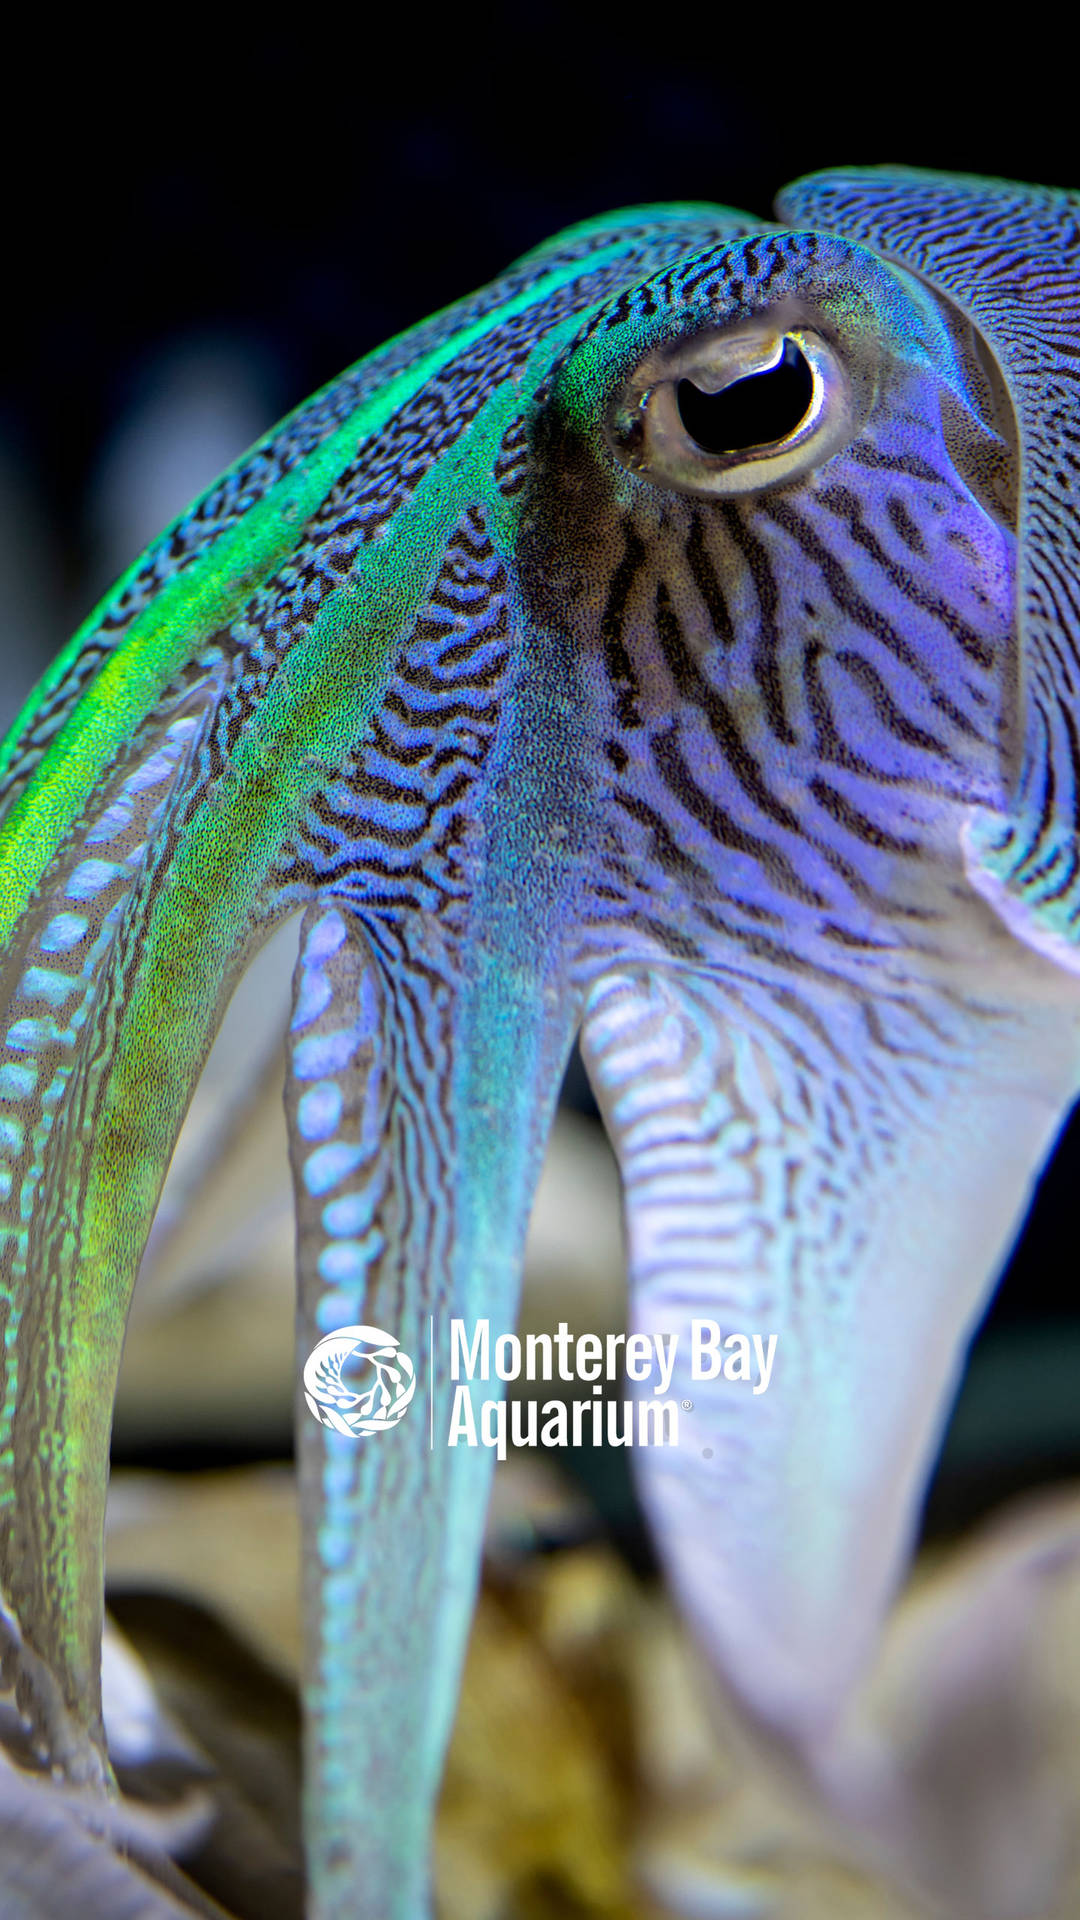 Majestic Marine Life: The Intriguing Cuttlefish Wallpaper